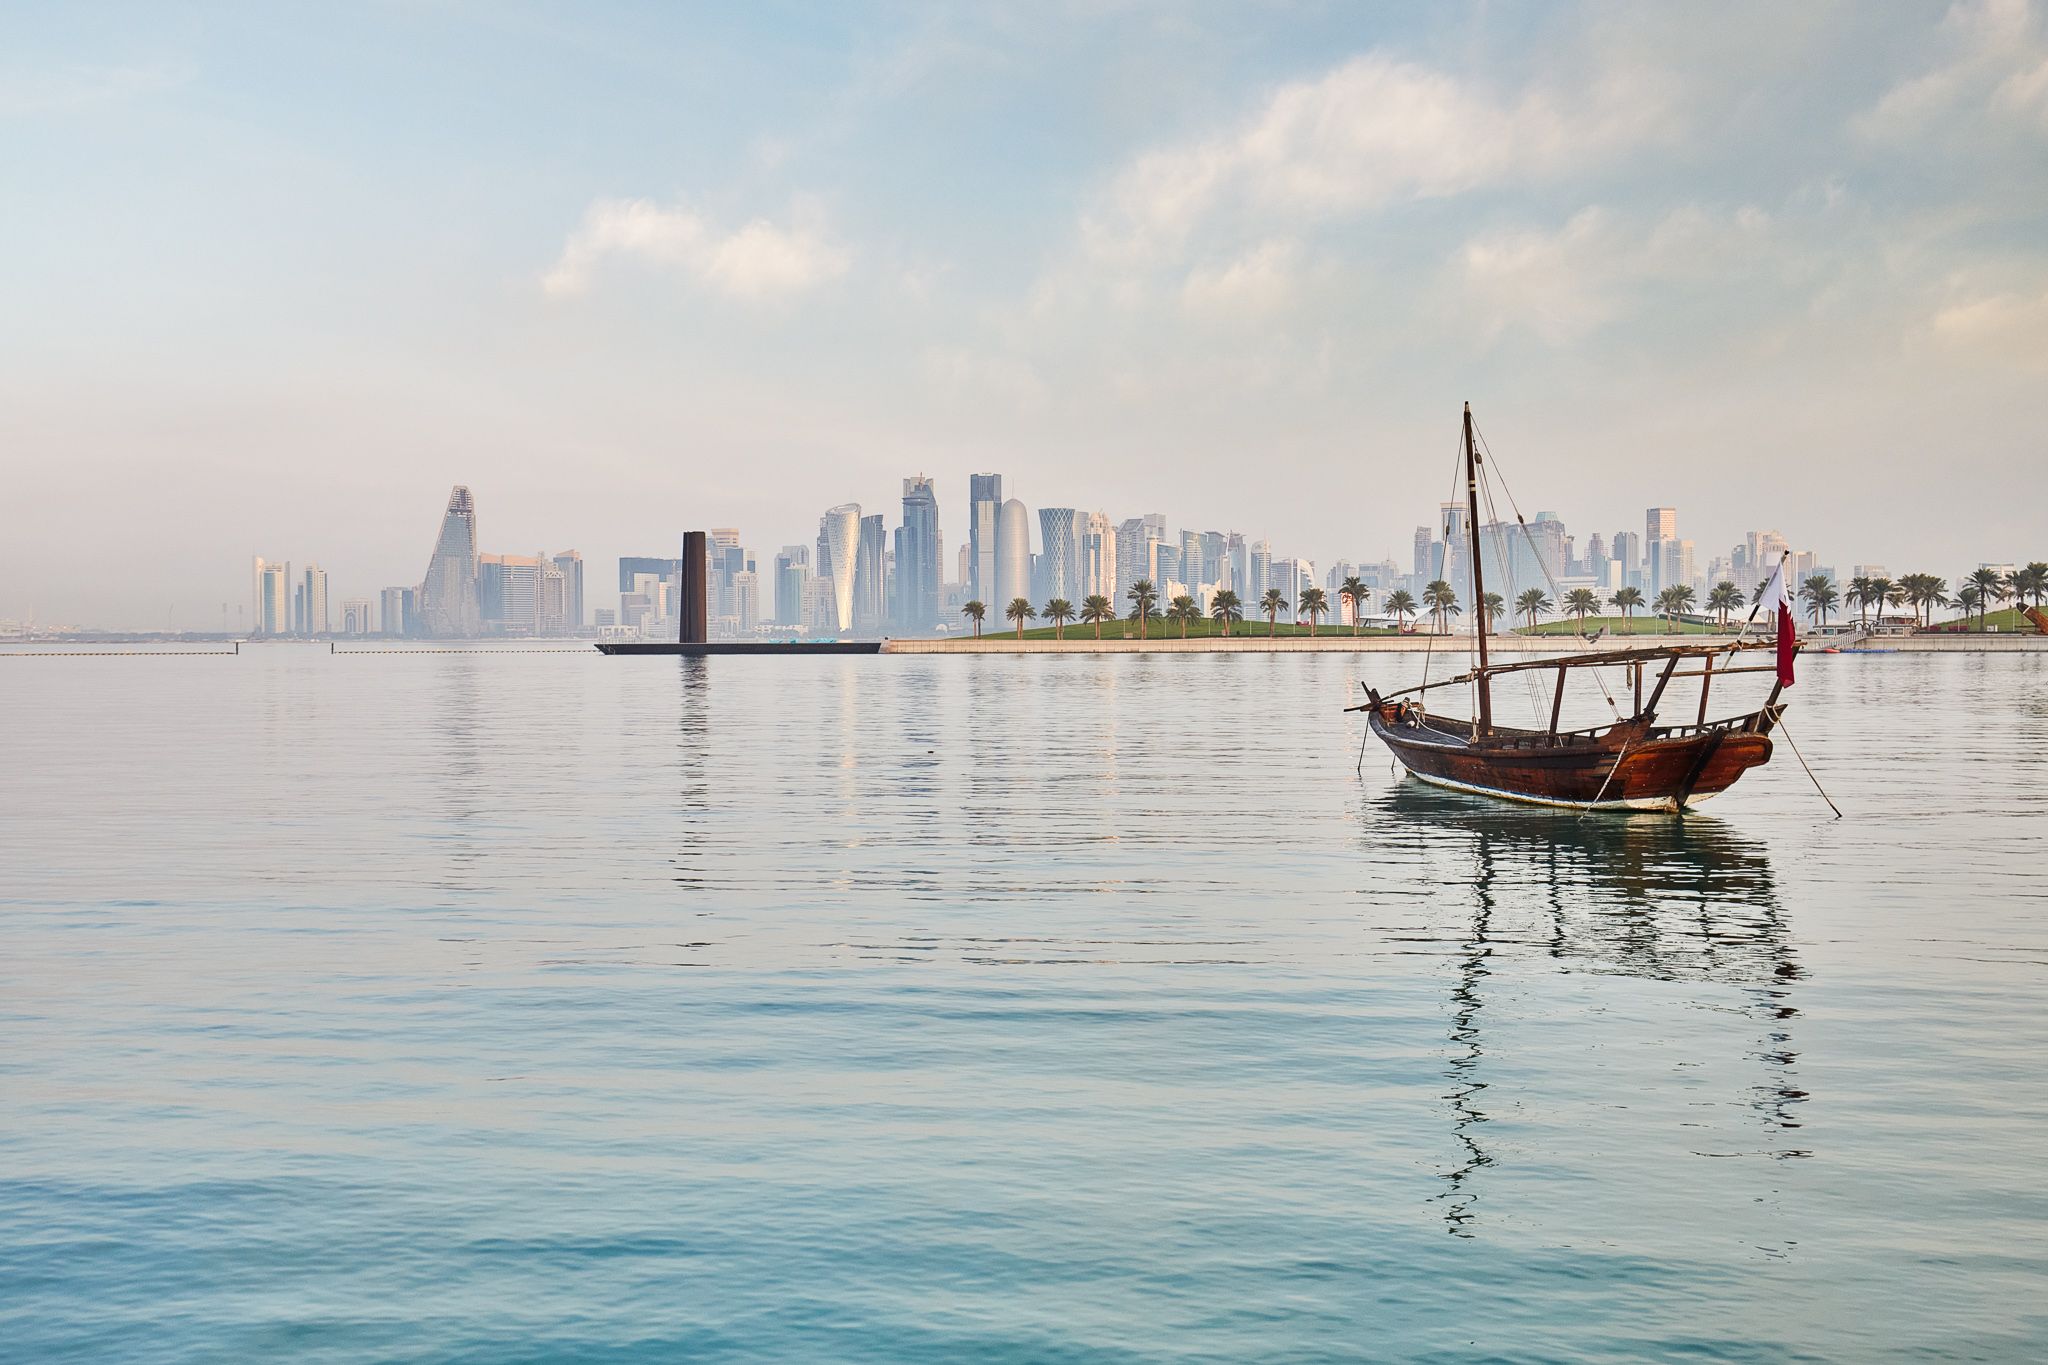 An empty wooden boat (a dhow boat) anchored in a calm bay. The boat has a mast and a shaded area open on the sides, and a Qatari flag flies from the stern. In the middle distance, a row of palm trees lines a waterfront, leading to the famed 7 sculpture. Behind 7, the skyscrapers of Doha are visible. It's day time.